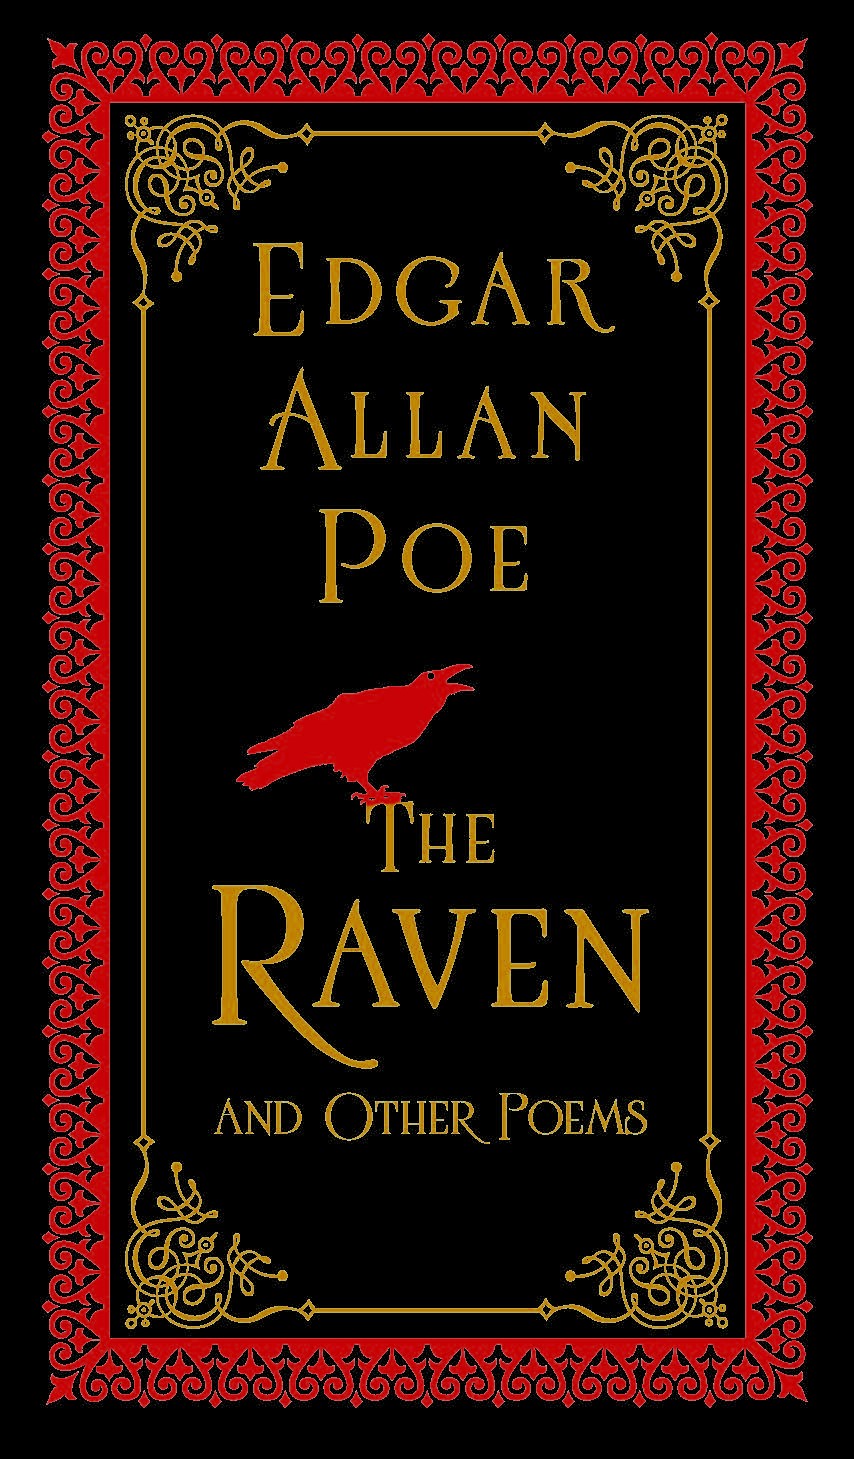 The Raven and Other Poems (Barnes & Noble Collectible Classics: Pocket Edition)